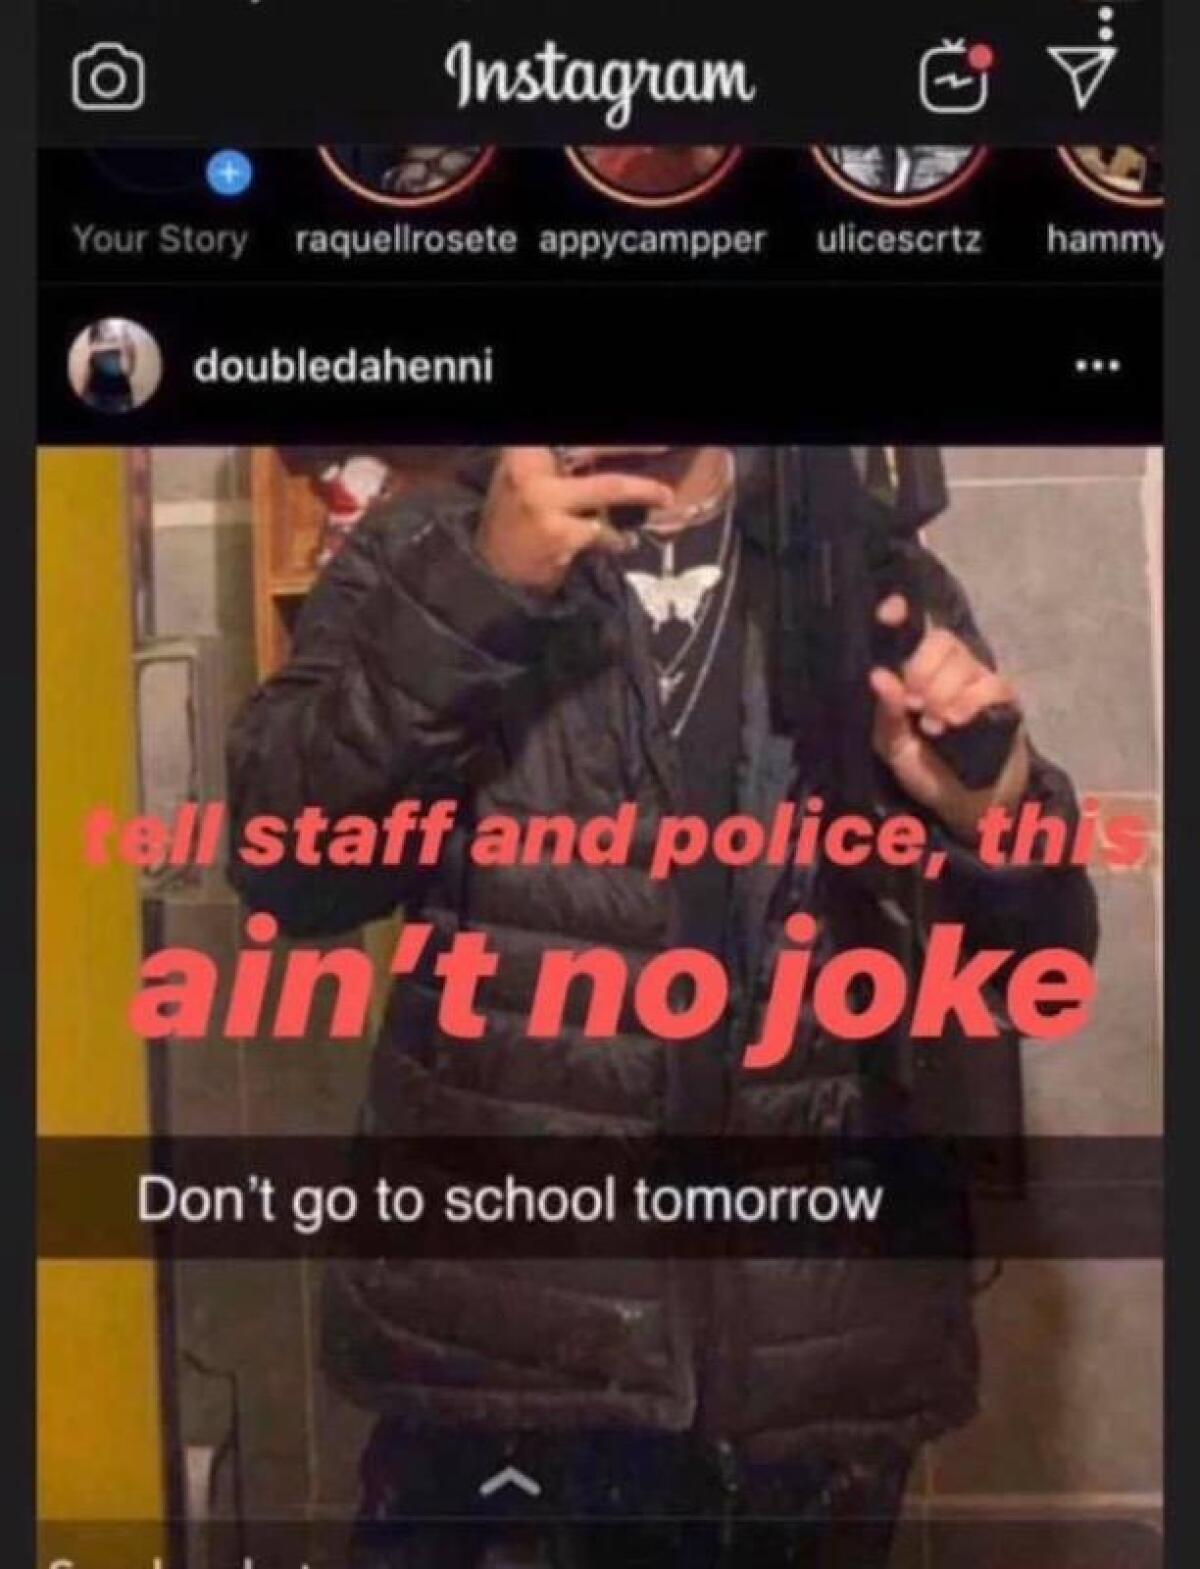 This photo was part of the post that prompted the police investigation into a possible threat at Estancia High School in Costa Mesa.